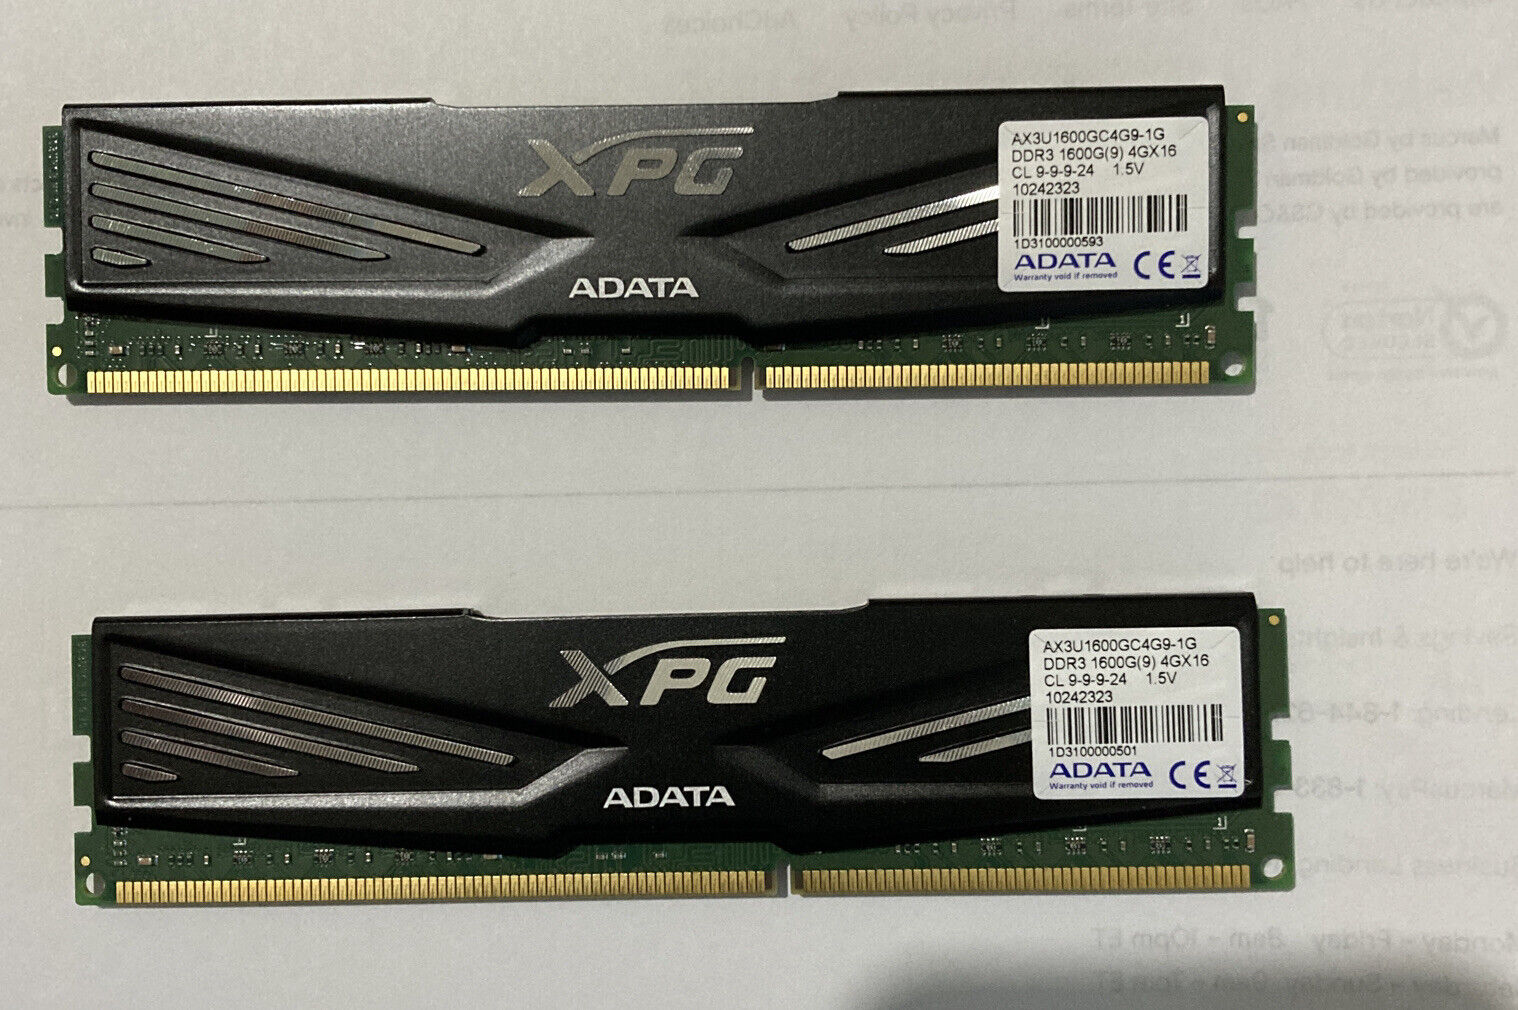 A-Data Gaming Series DDR3 1600G (9)CL 9-9-9-24 Voltage 1.5v-Used